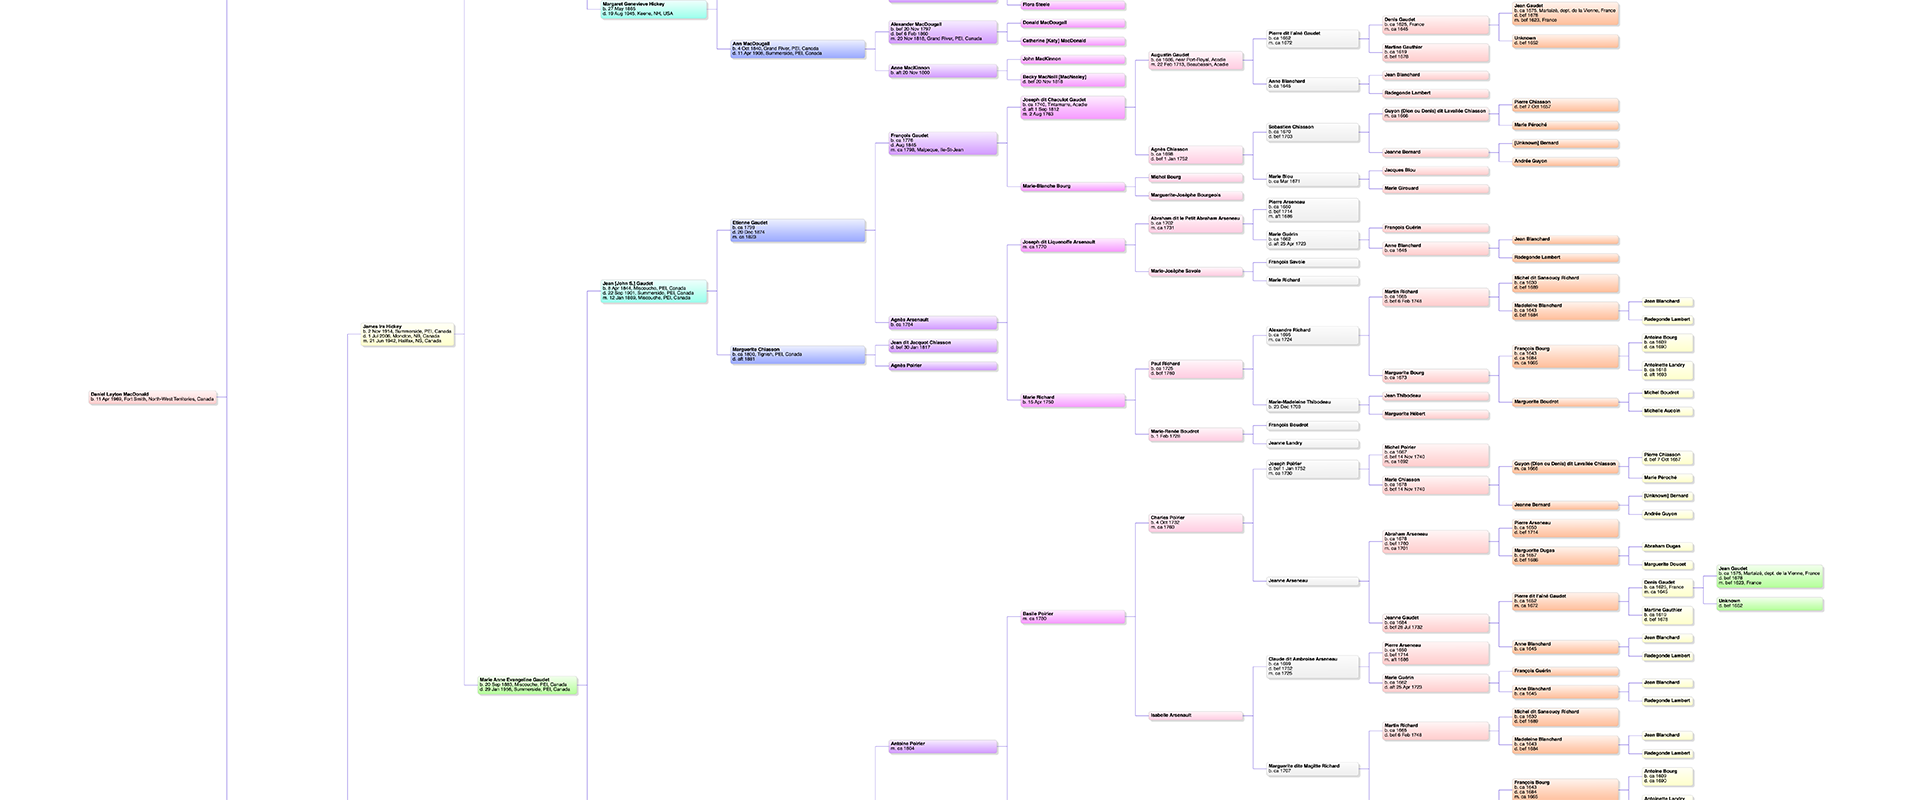 A partial and obscured view of an ancestor chart